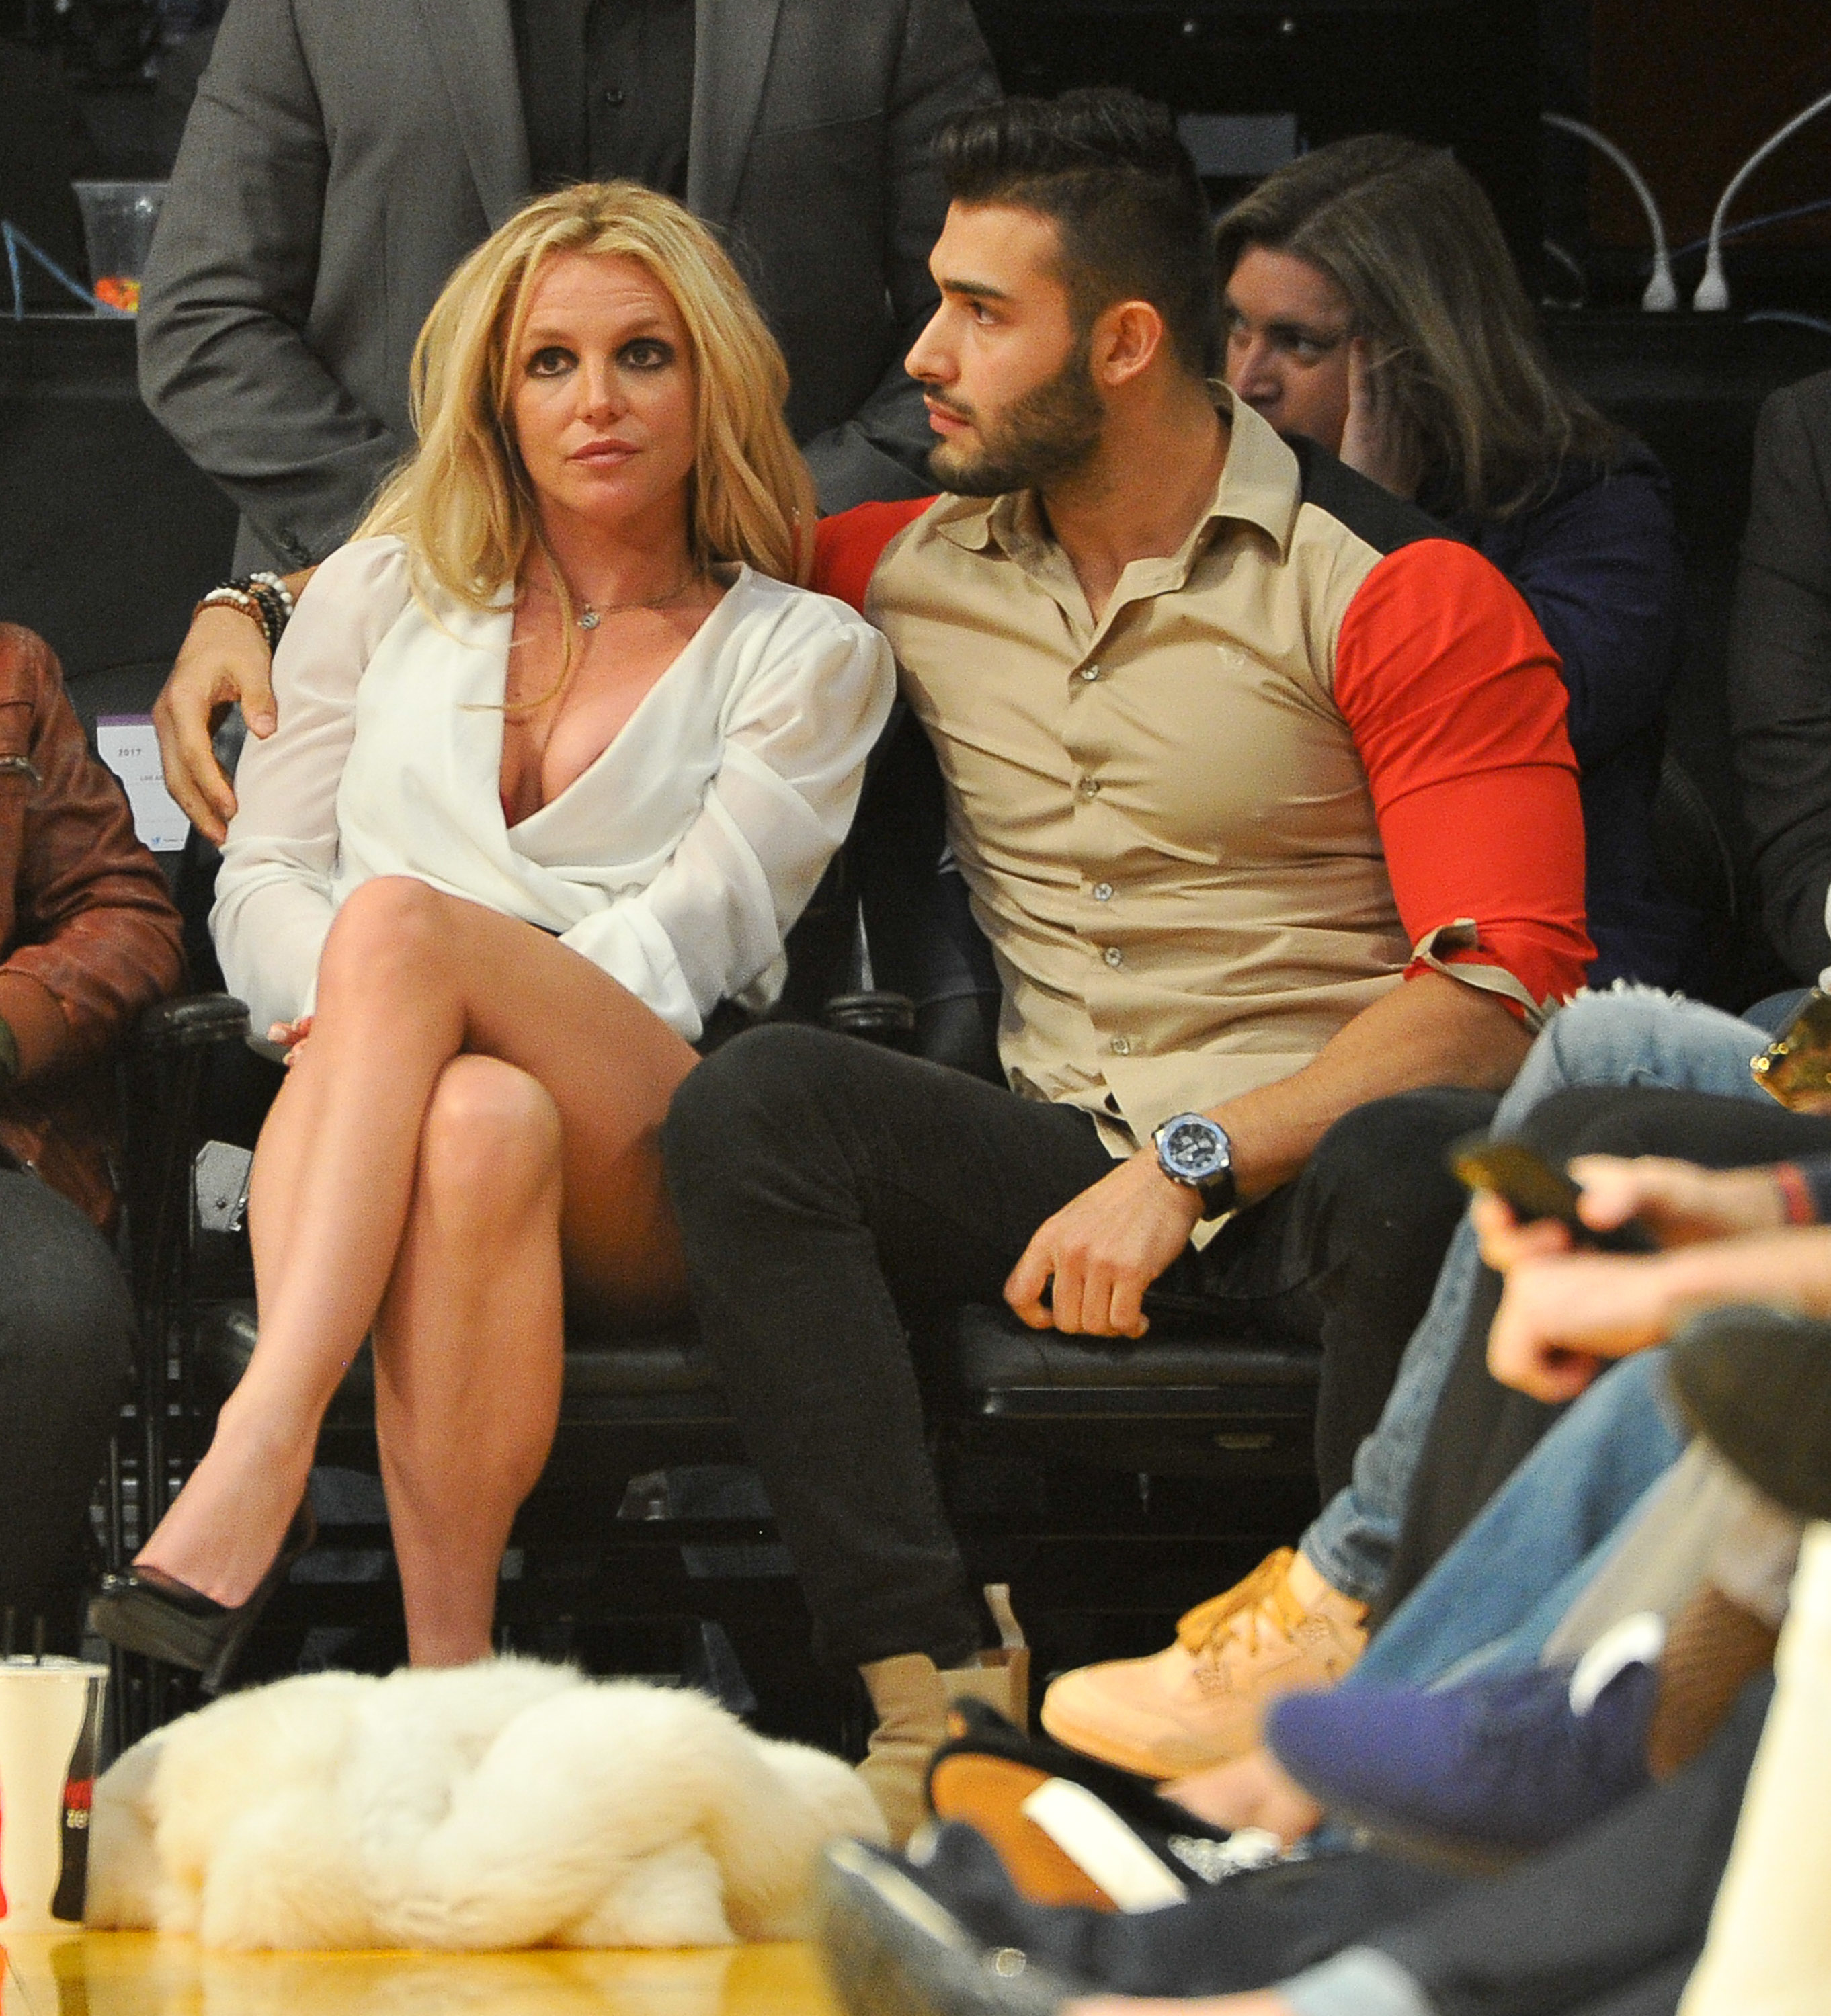 Britney and Sam looking serious together at an event